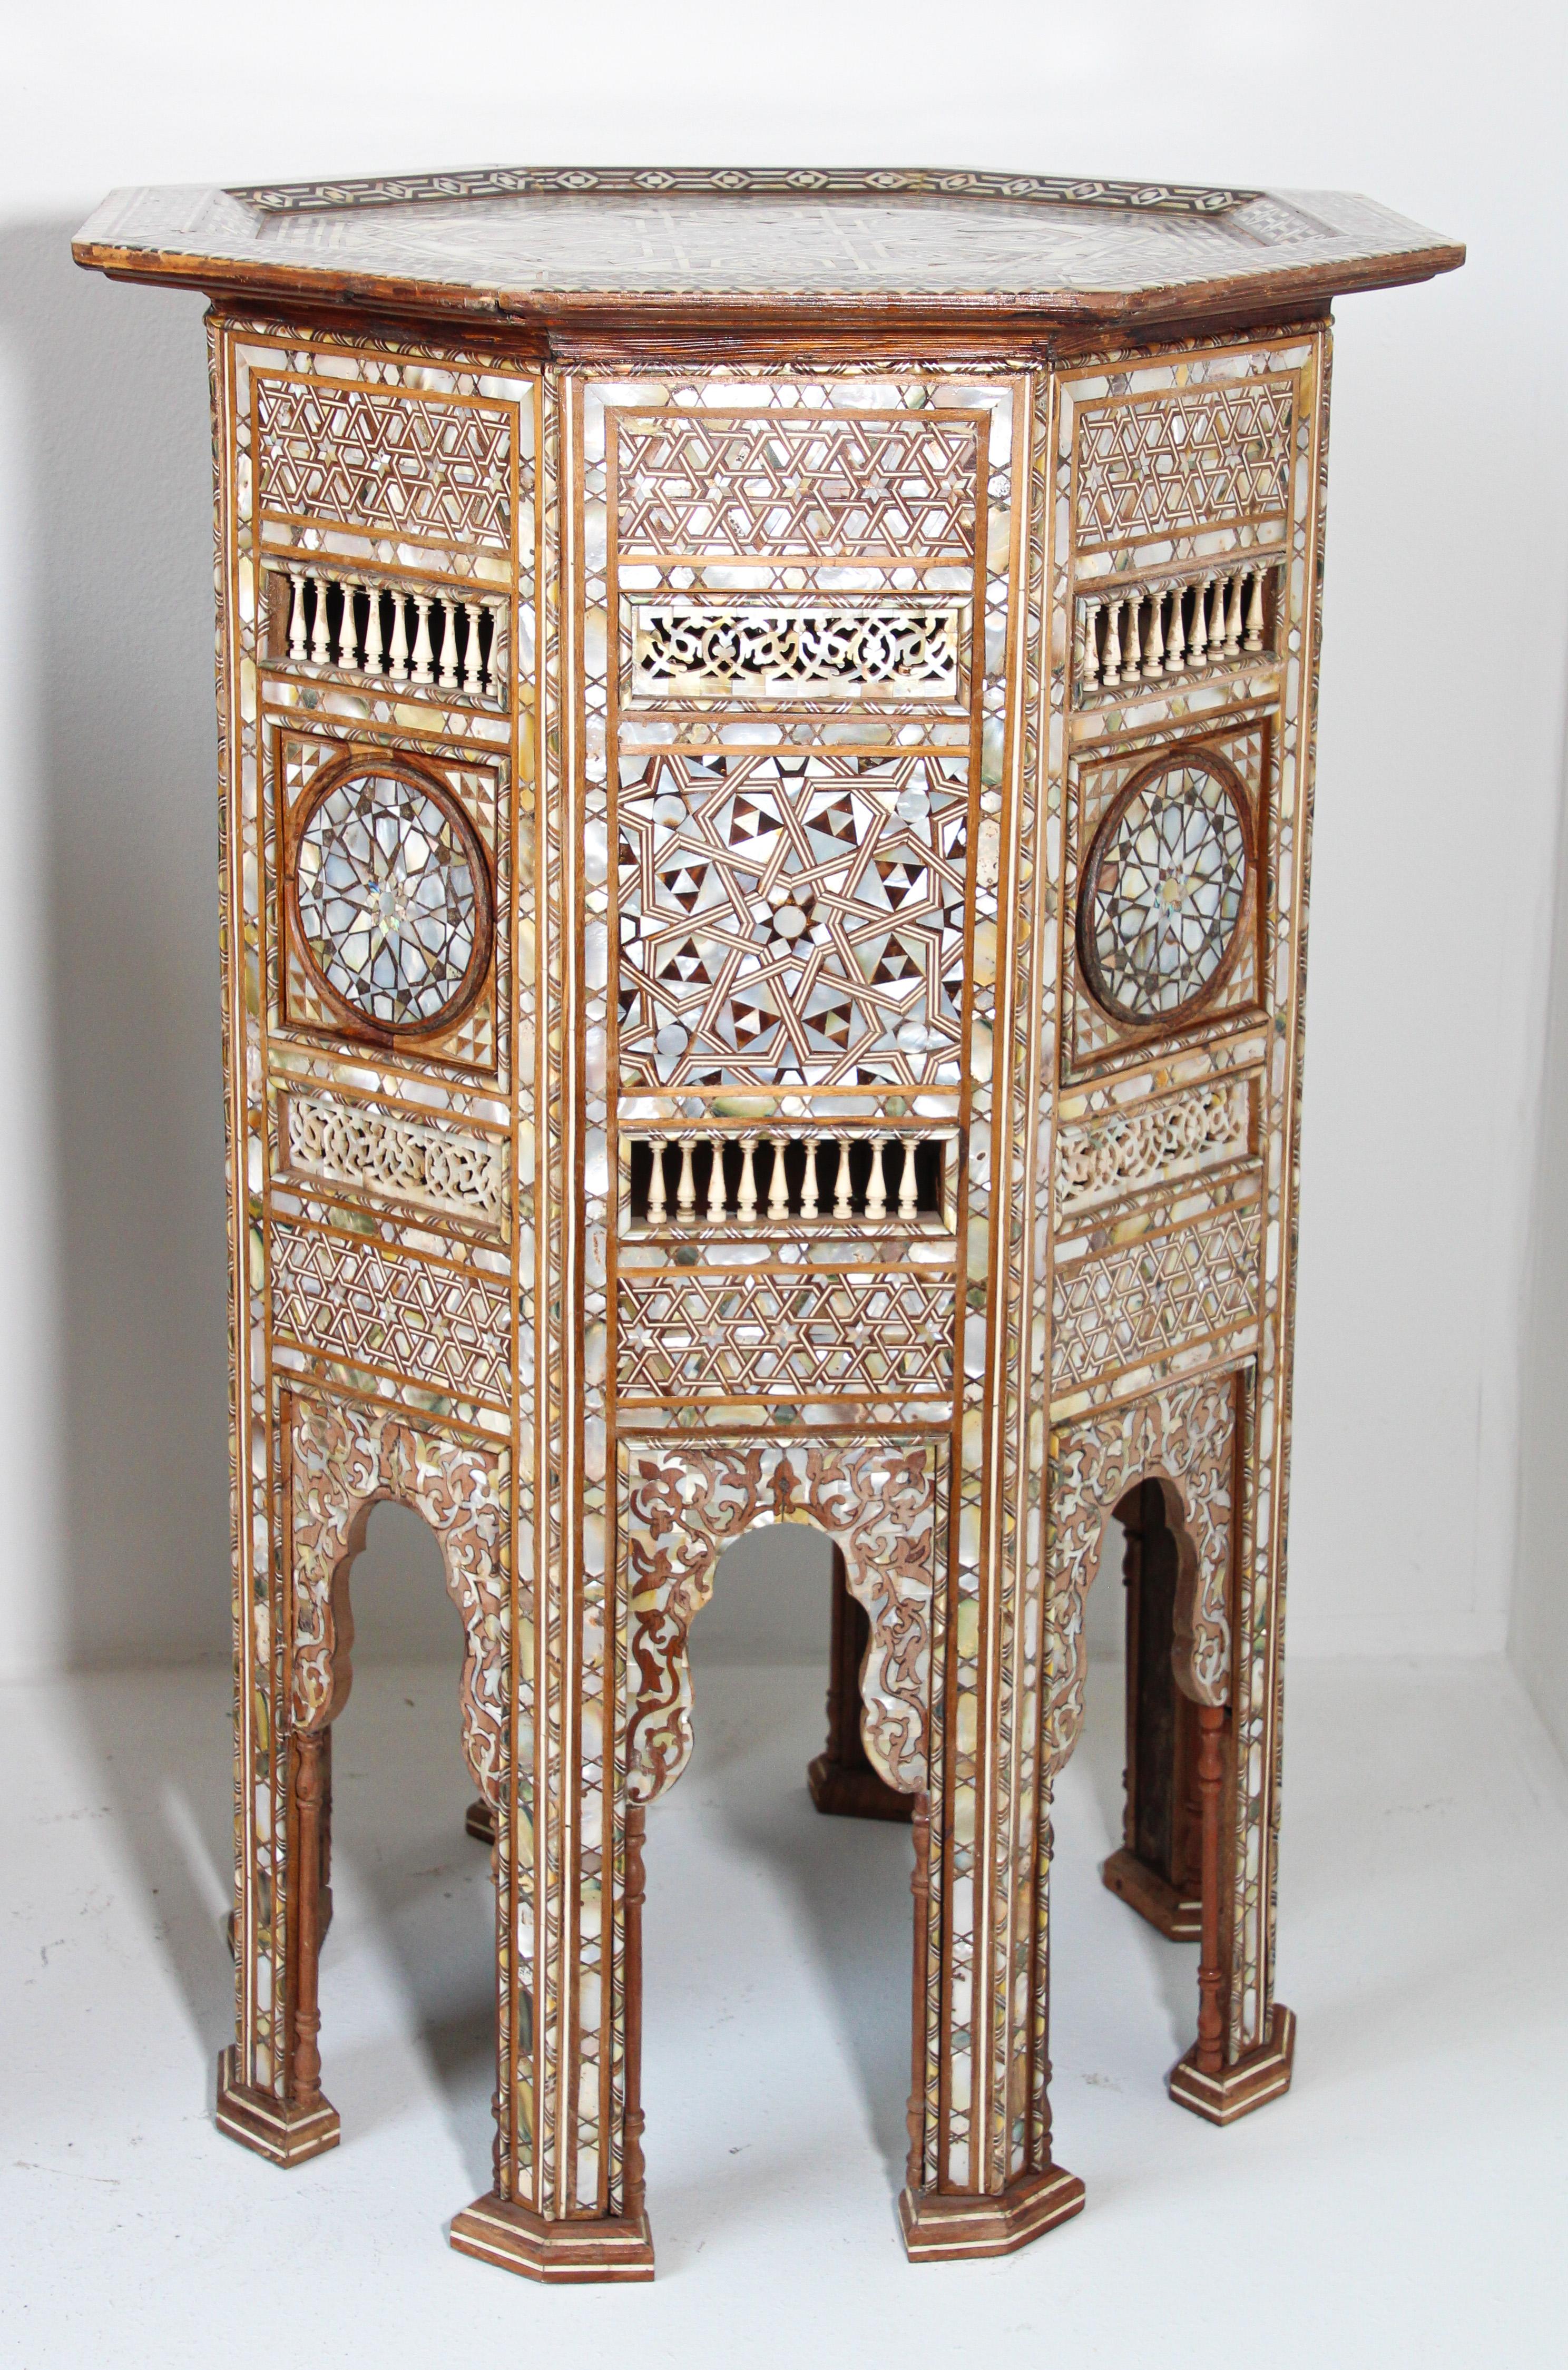 19th Century Moorish Middle Eastern Large Pedestal Tables Inlaid with Shell, 19th C. For Sale